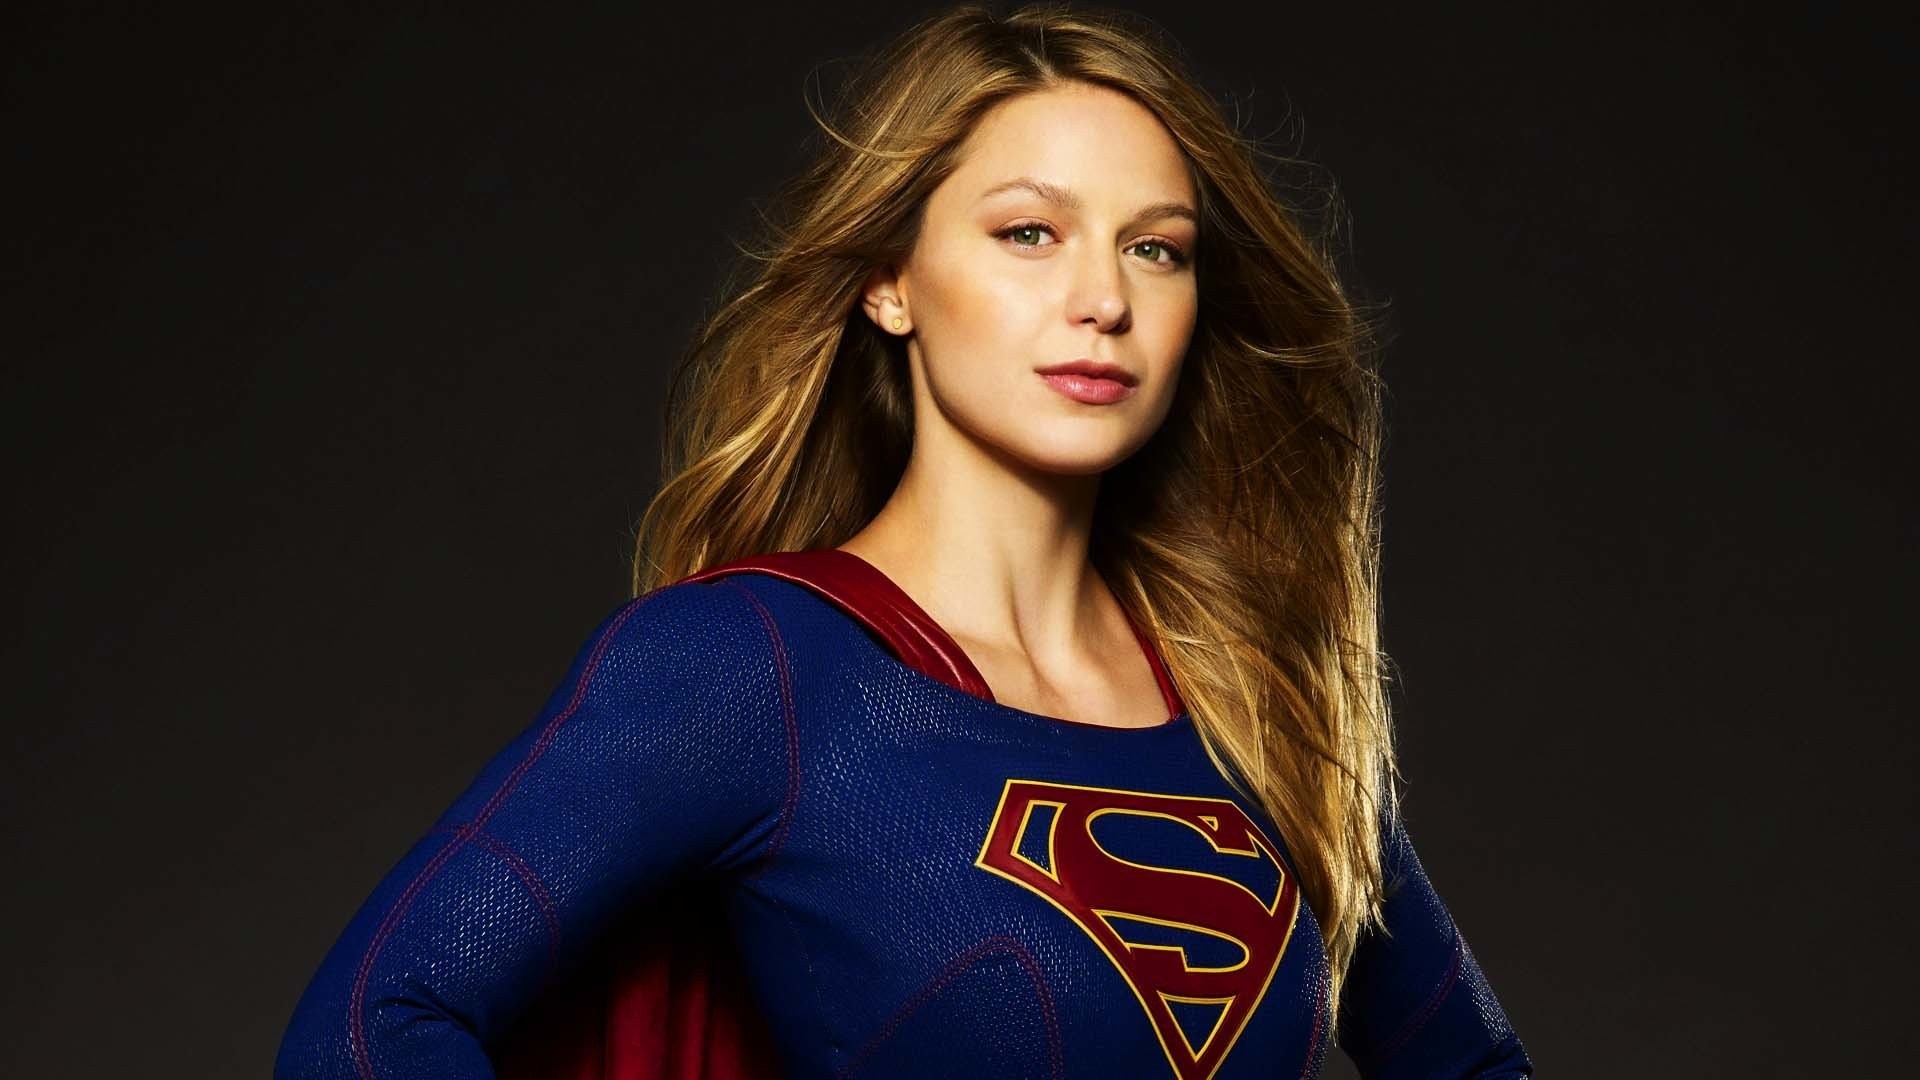 Supergirl Wallpaper For Desktop with high-resolution 1920x1080 pixel. You can use this wallpaper for your Windows and Mac OS computers as well as your Android and iPhone smartphones